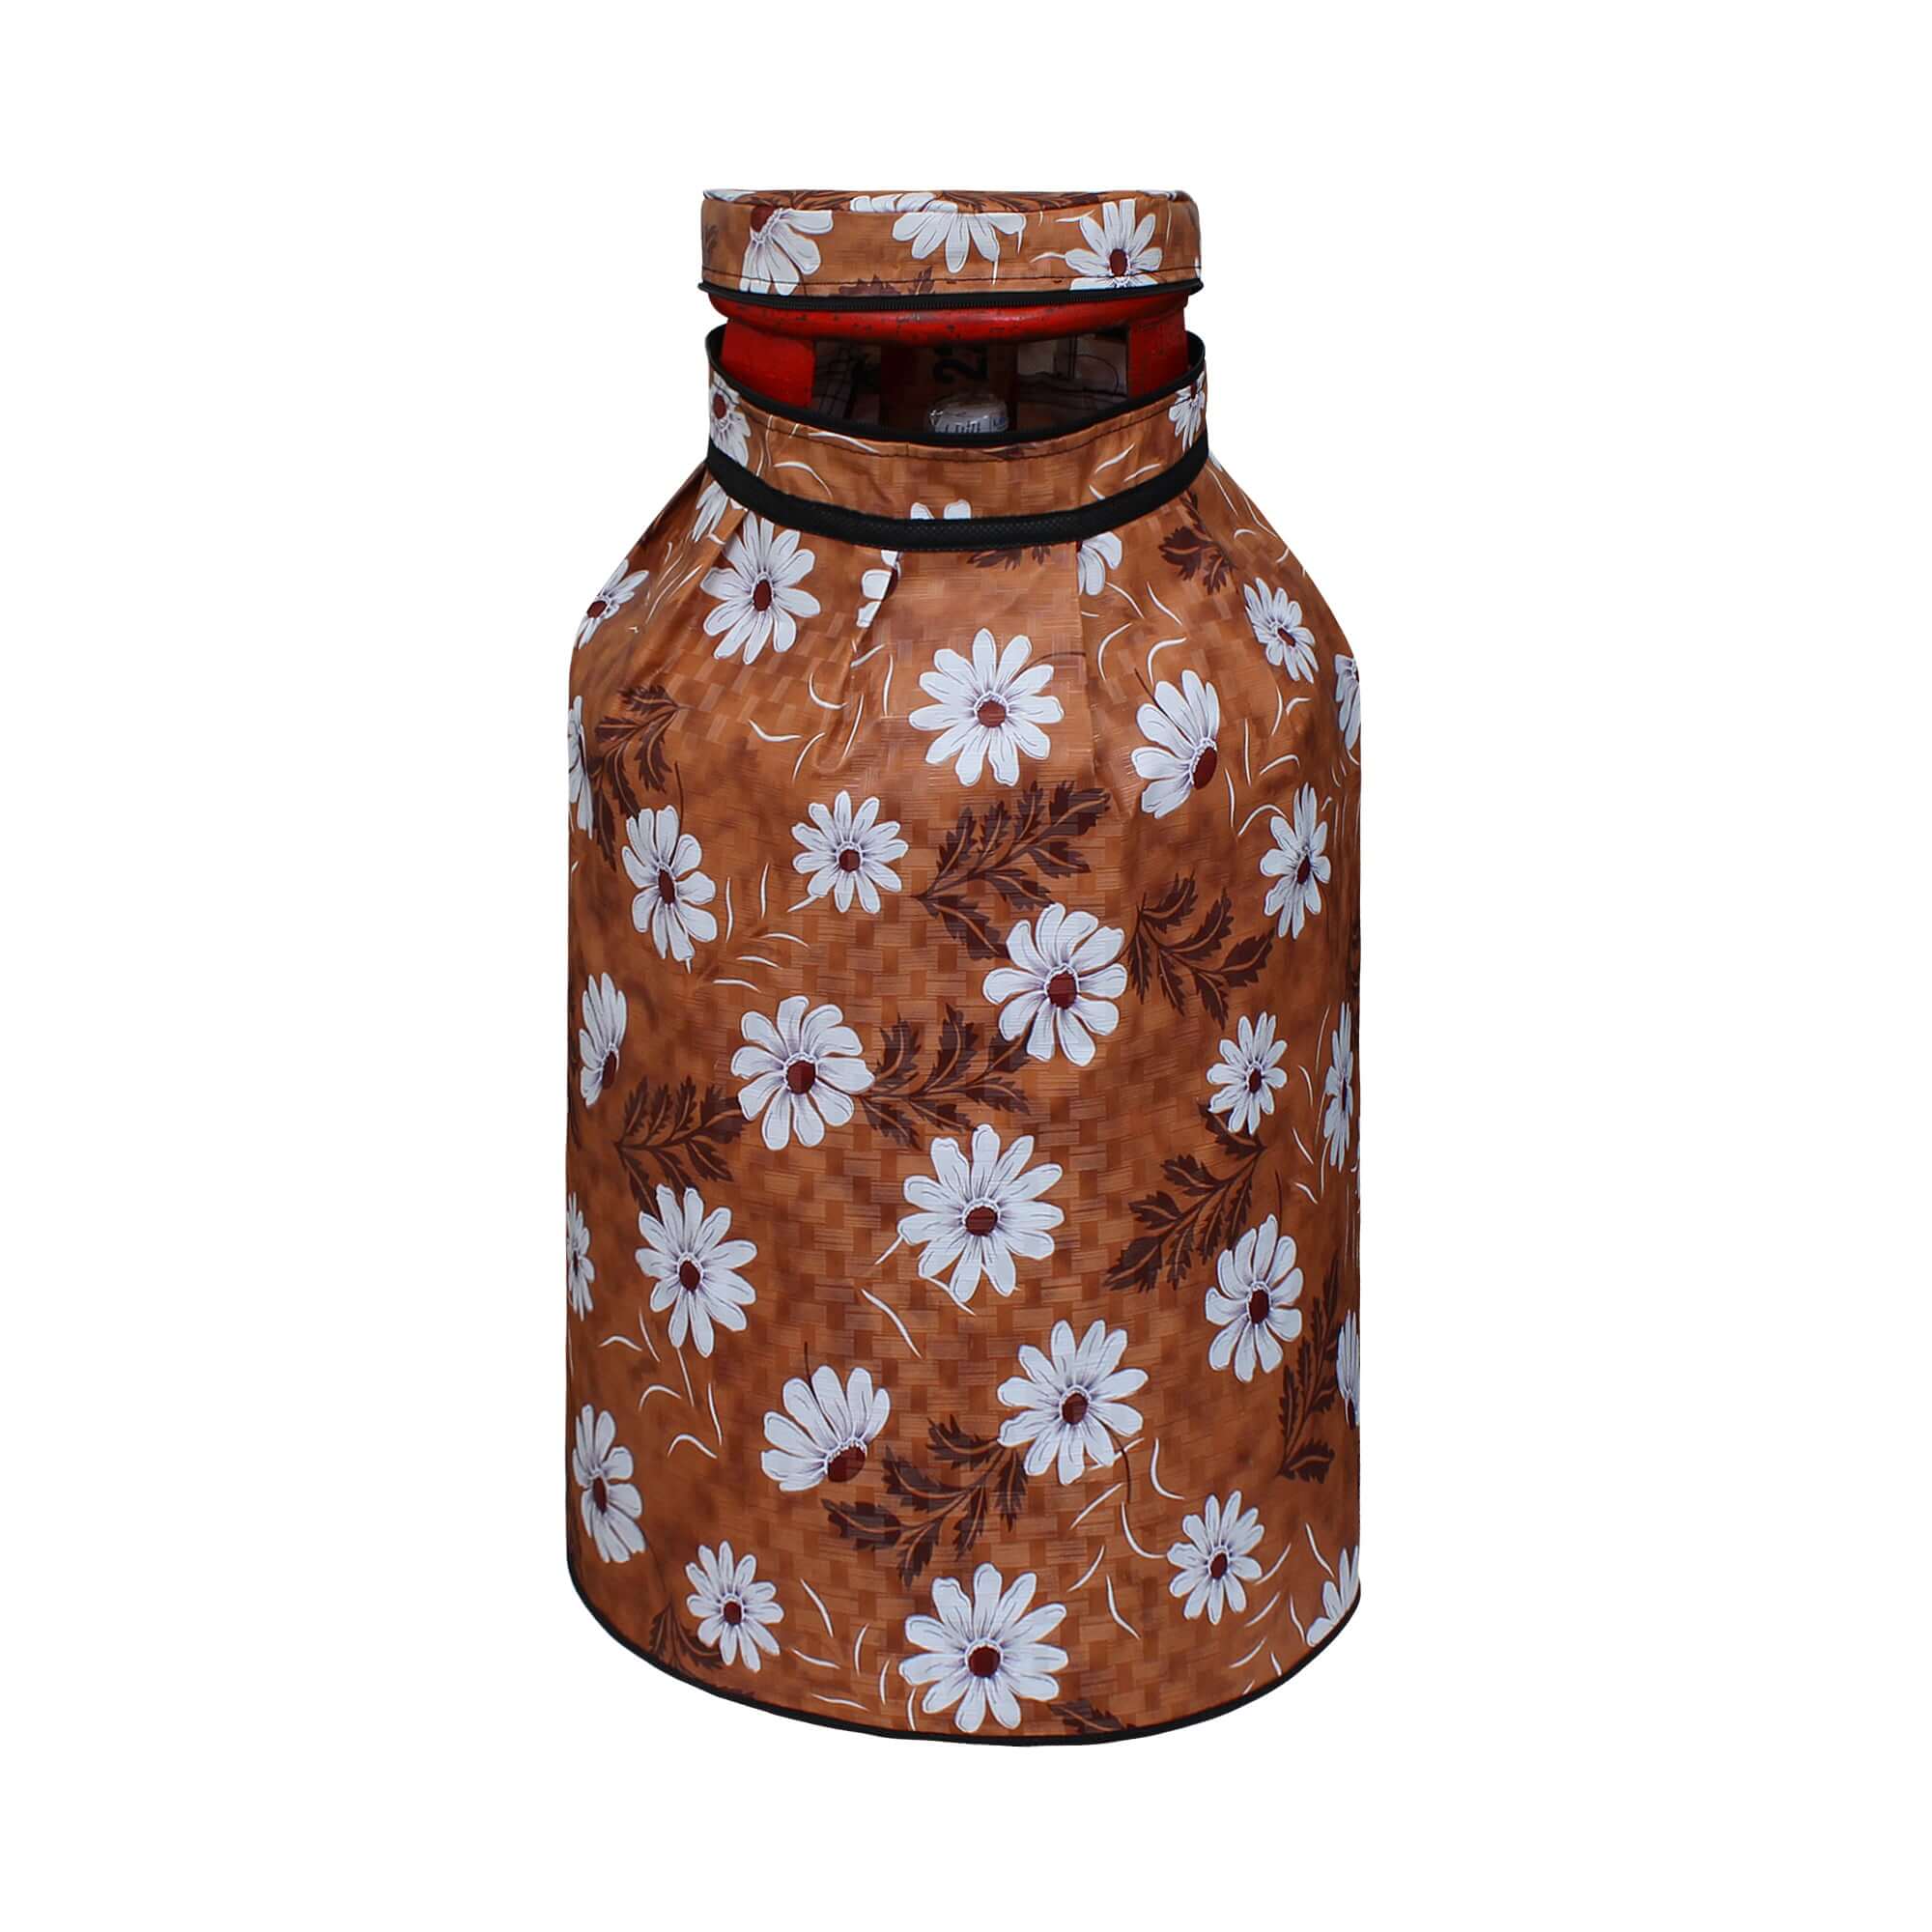 LPG Gas Cylinder Cover, SA49 - Dream Care Furnishings Private Limited